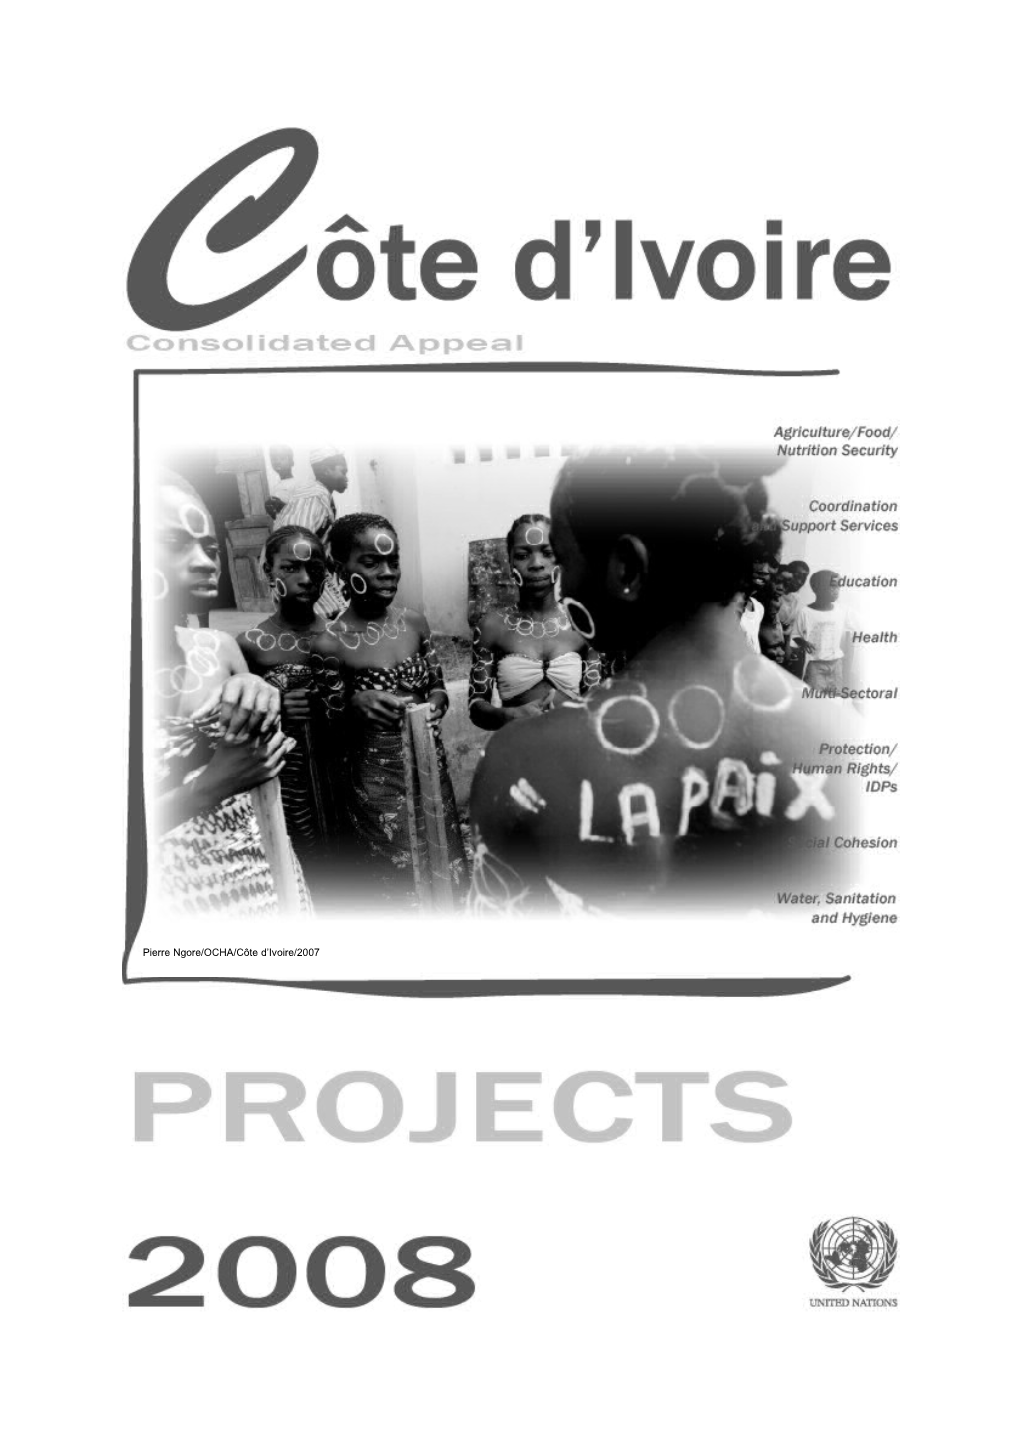 Consolidated Appeal for Cote D'ivoire 2008 Vol 2 (Word)